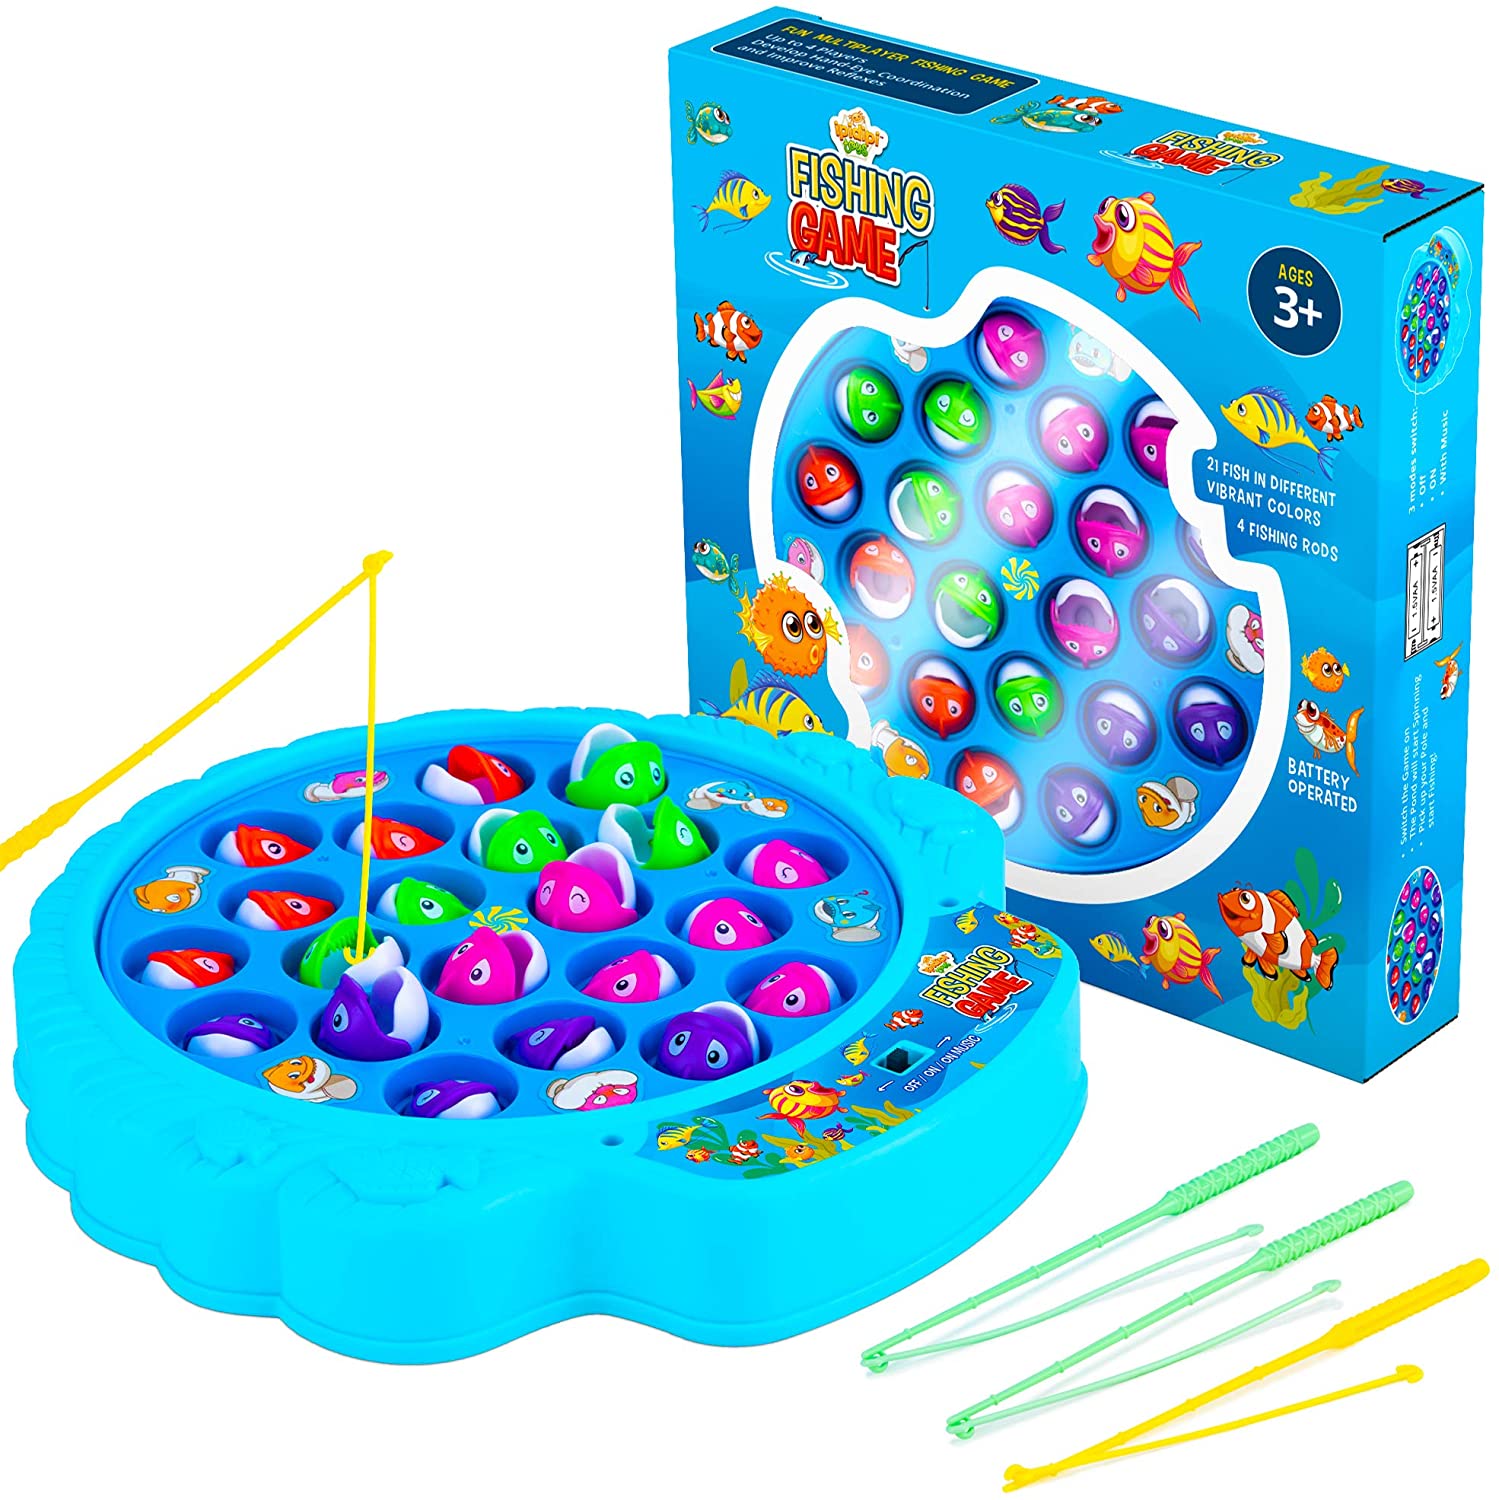 Fishing Game Toy 6 Small Fish And Fishing Rod For Game Birthday